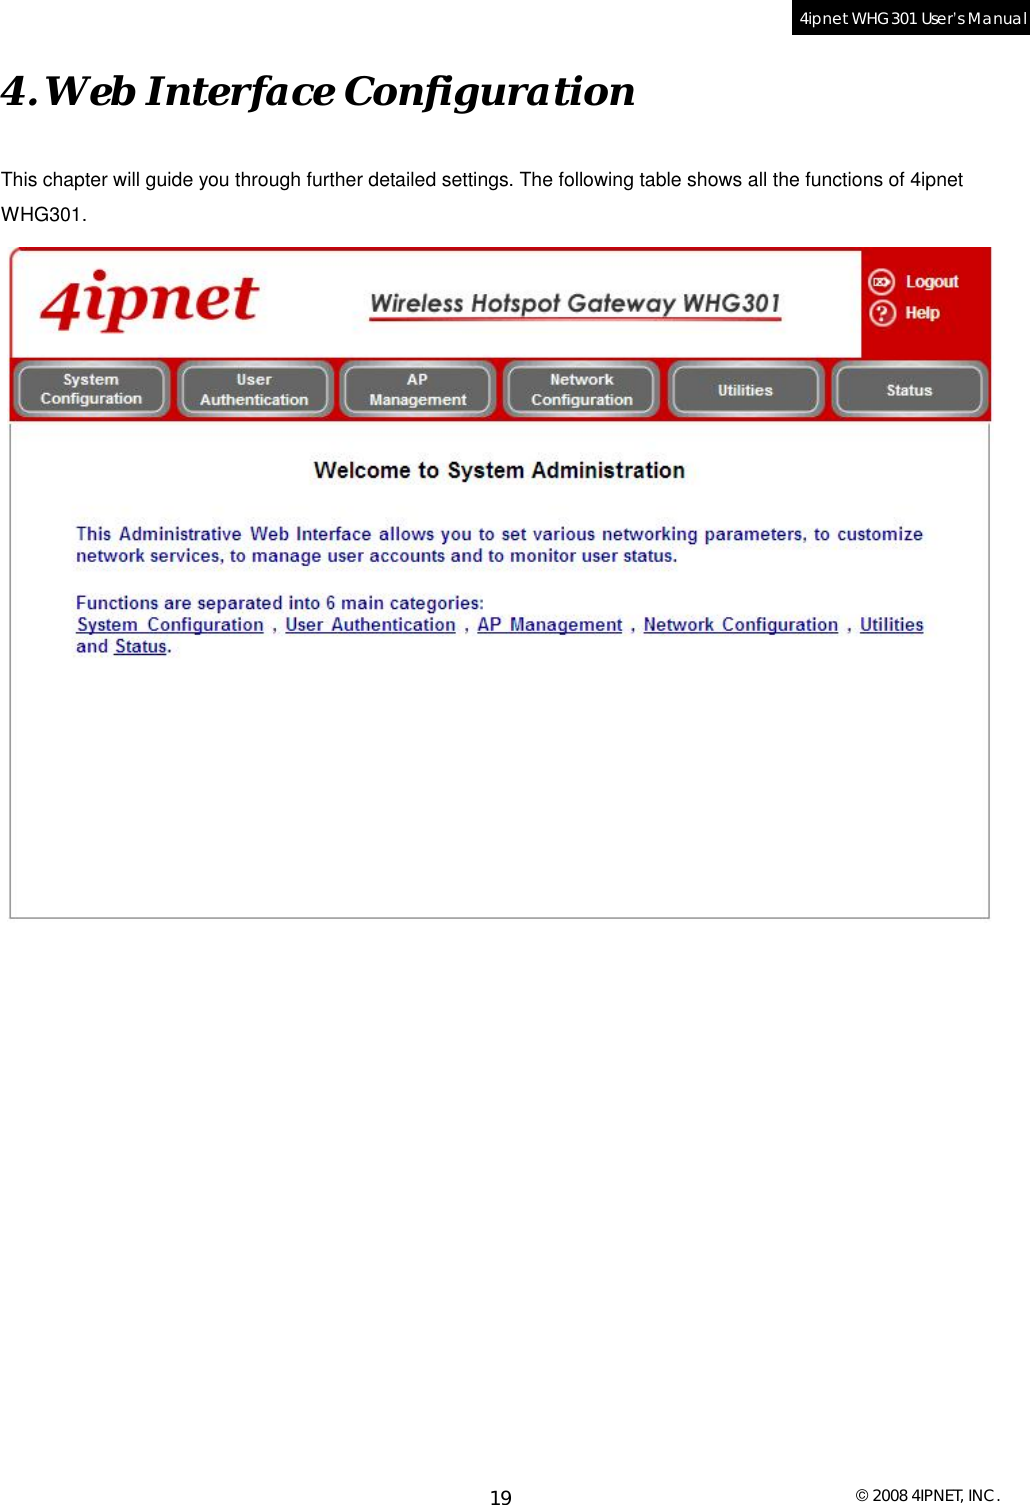  © 2008 4IPNET, INC. 19 4ipnet WHG301 User’s Manual  4. Web Interface Configuration This chapter will guide you through further detailed settings. The following table shows all the functions of 4ipnet WHG301.  